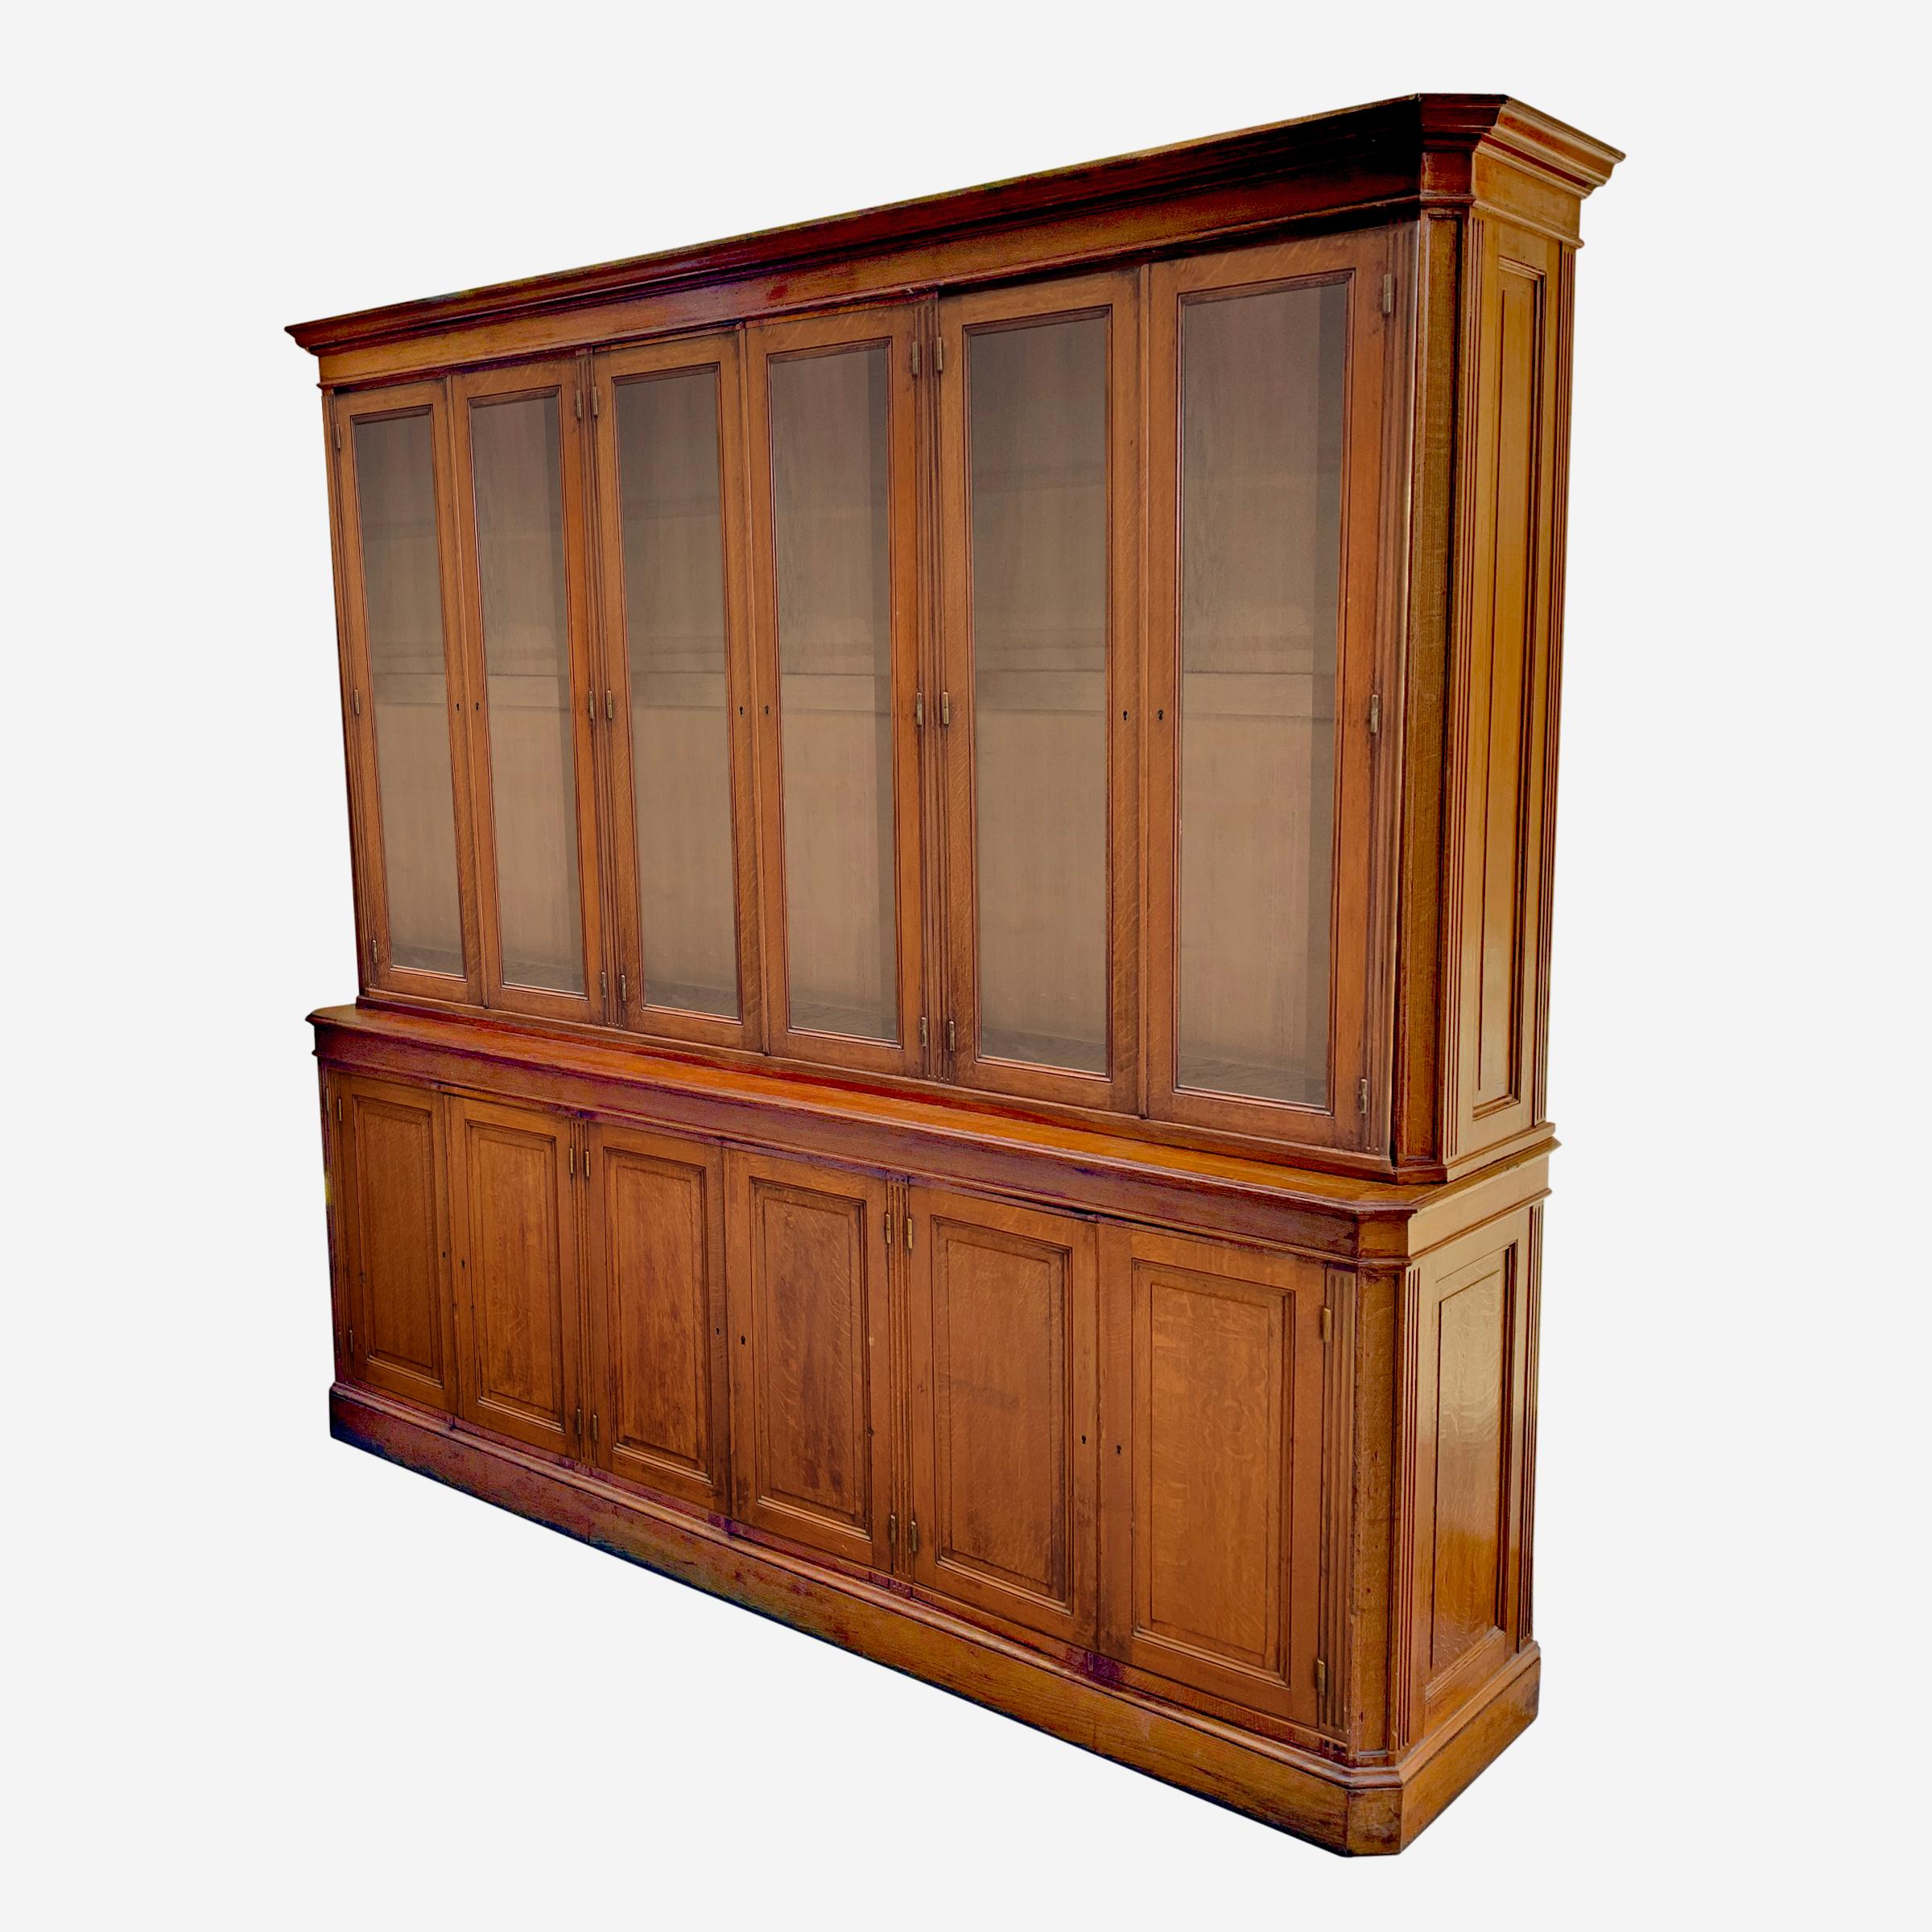 An incredible 19th century French oak breakfront cabinet with twelve doors, six with glass and six without, with adjustable shelves, brass bullet hinges, and a wonderful presence! Perfect for your butler's pantry, kitchen, or any number of other